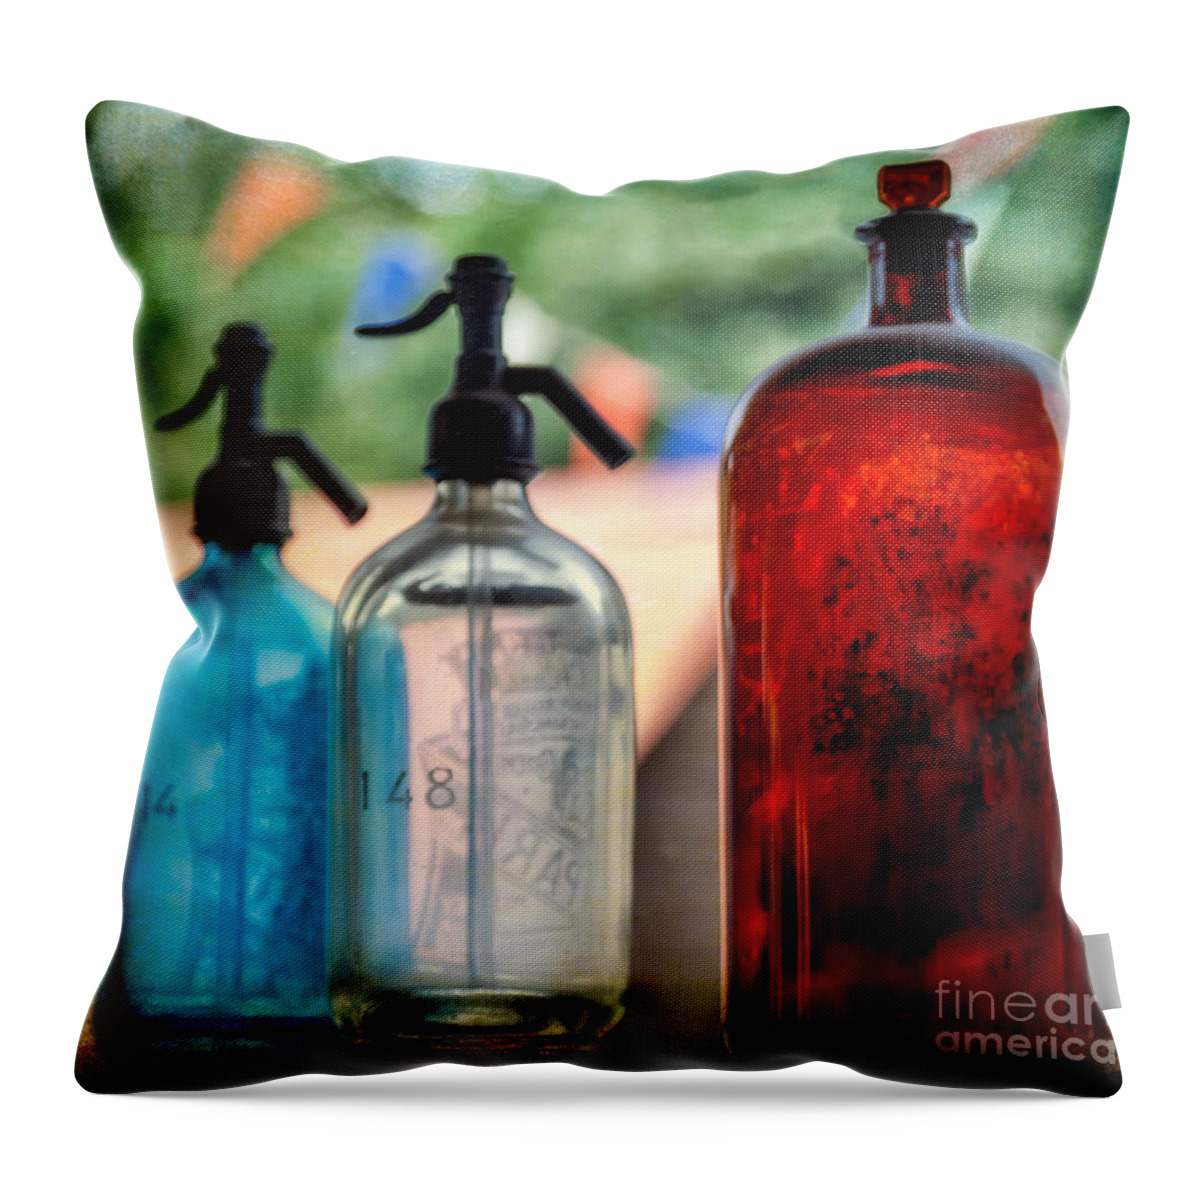 Vintage Soda Syphon Throw Pillow featuring the photograph Victorian Soda Syphon by Adrian Evans